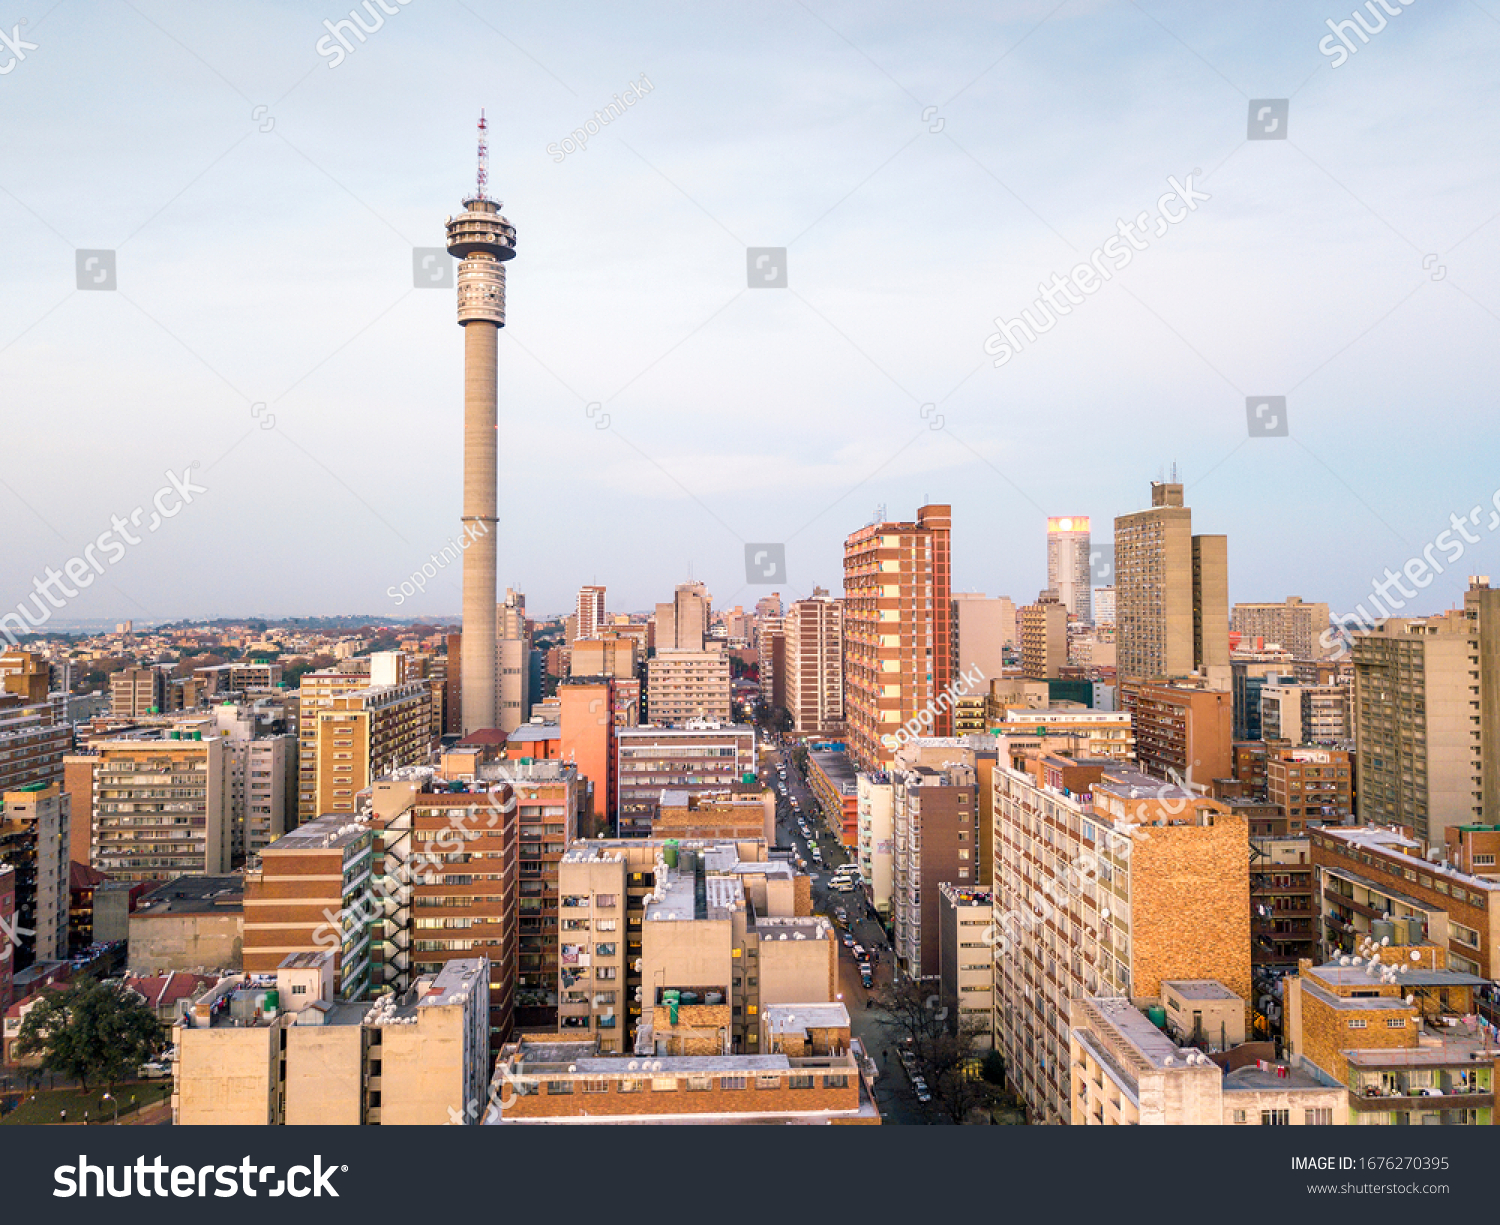 Skyscrapers in downtown of Johannesburg, South Africa #1676270395